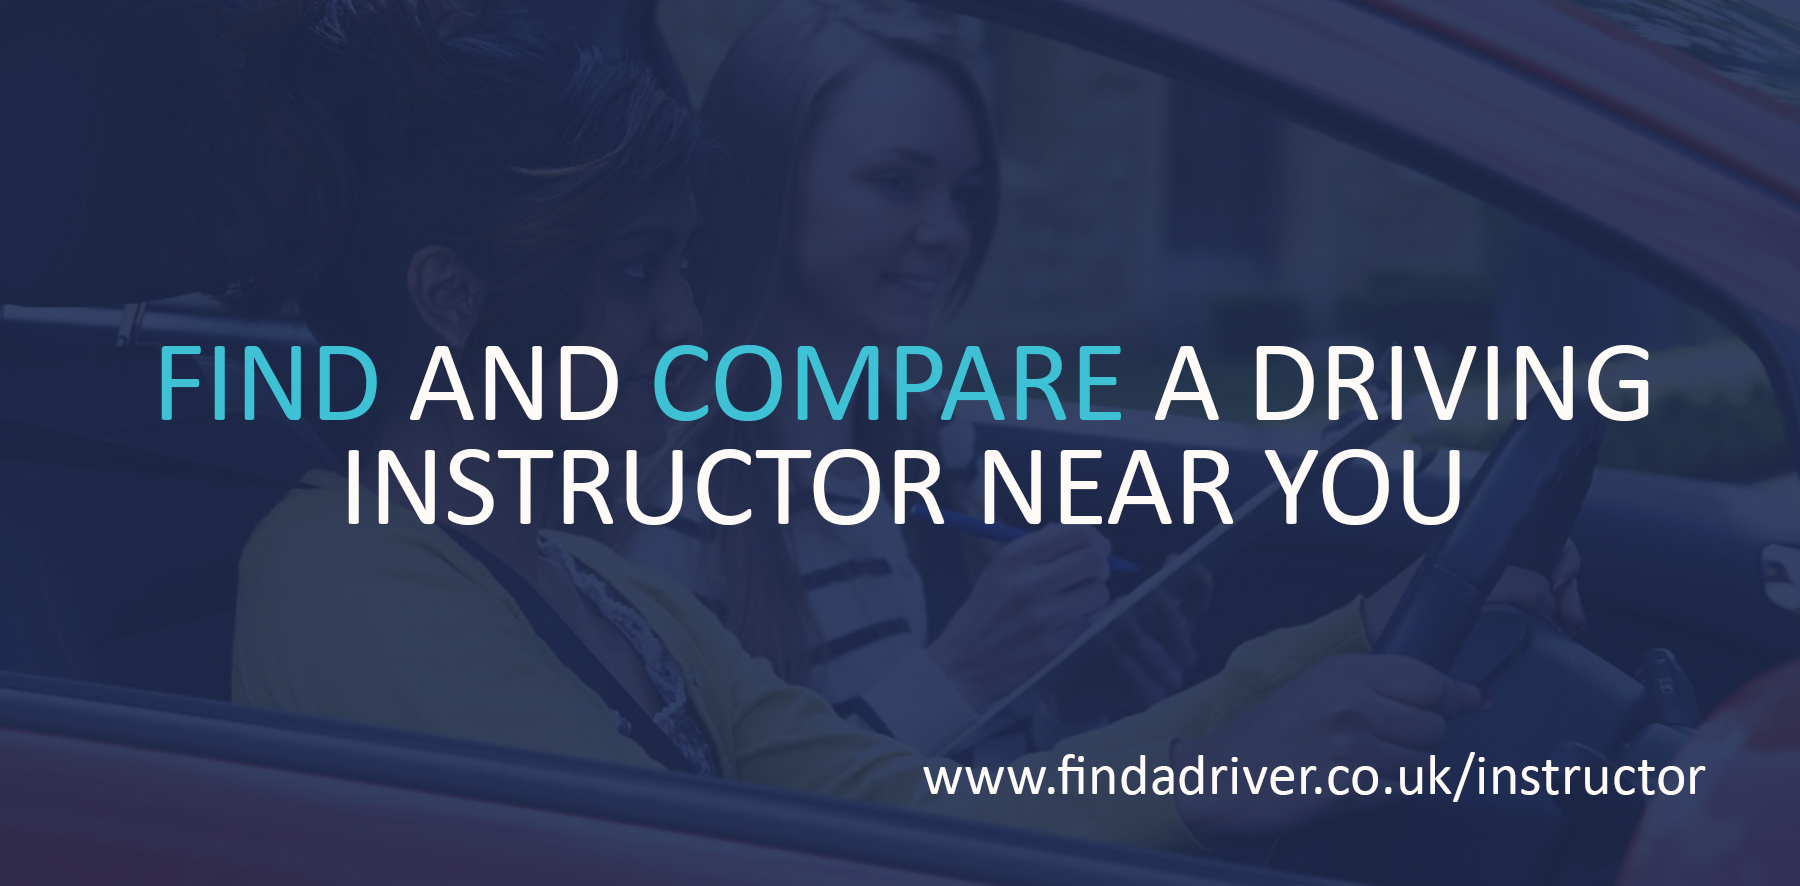 Find a driving instructor - banner